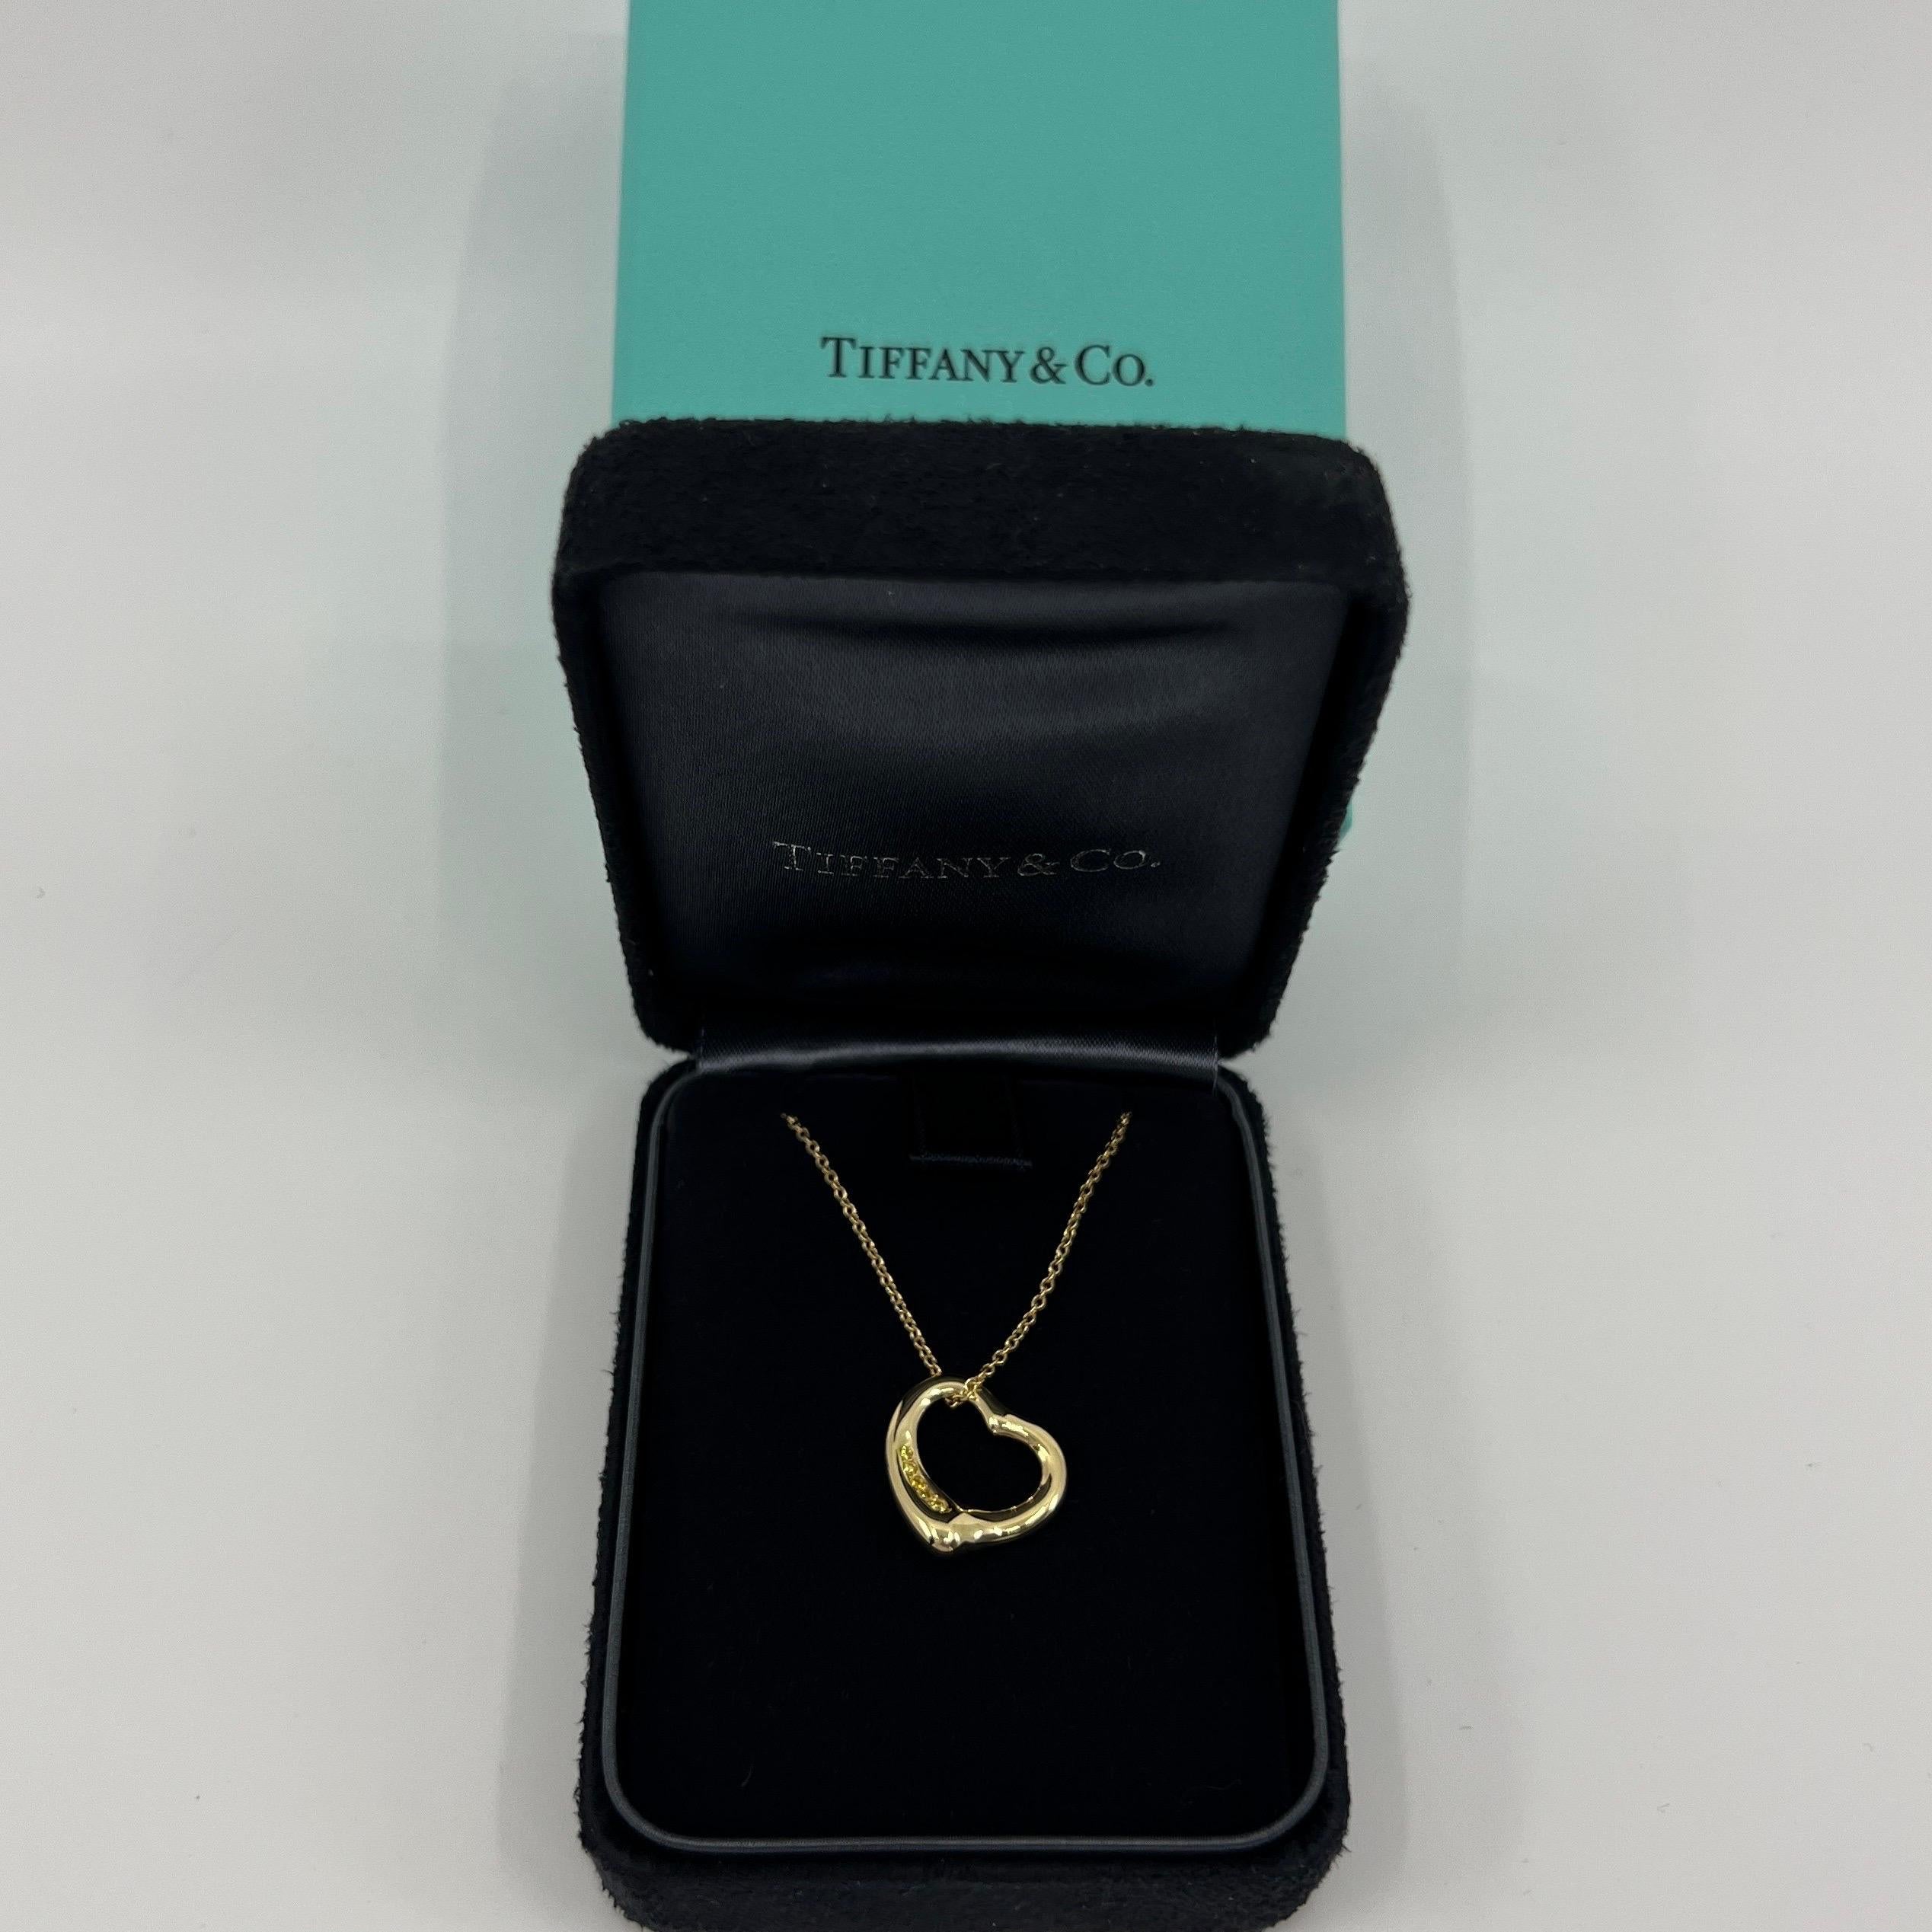 Rare Vintage Tiffany & Co. Elsa Peretti Open Heart Yellow Diamond 18k Yellow Gold Pendant Necklace.

A beautiful, authentic Tiffany & Co open heart pendant from the stylish and popular Elsa Peretti range. 

The pendant and chain are 18k solid gold